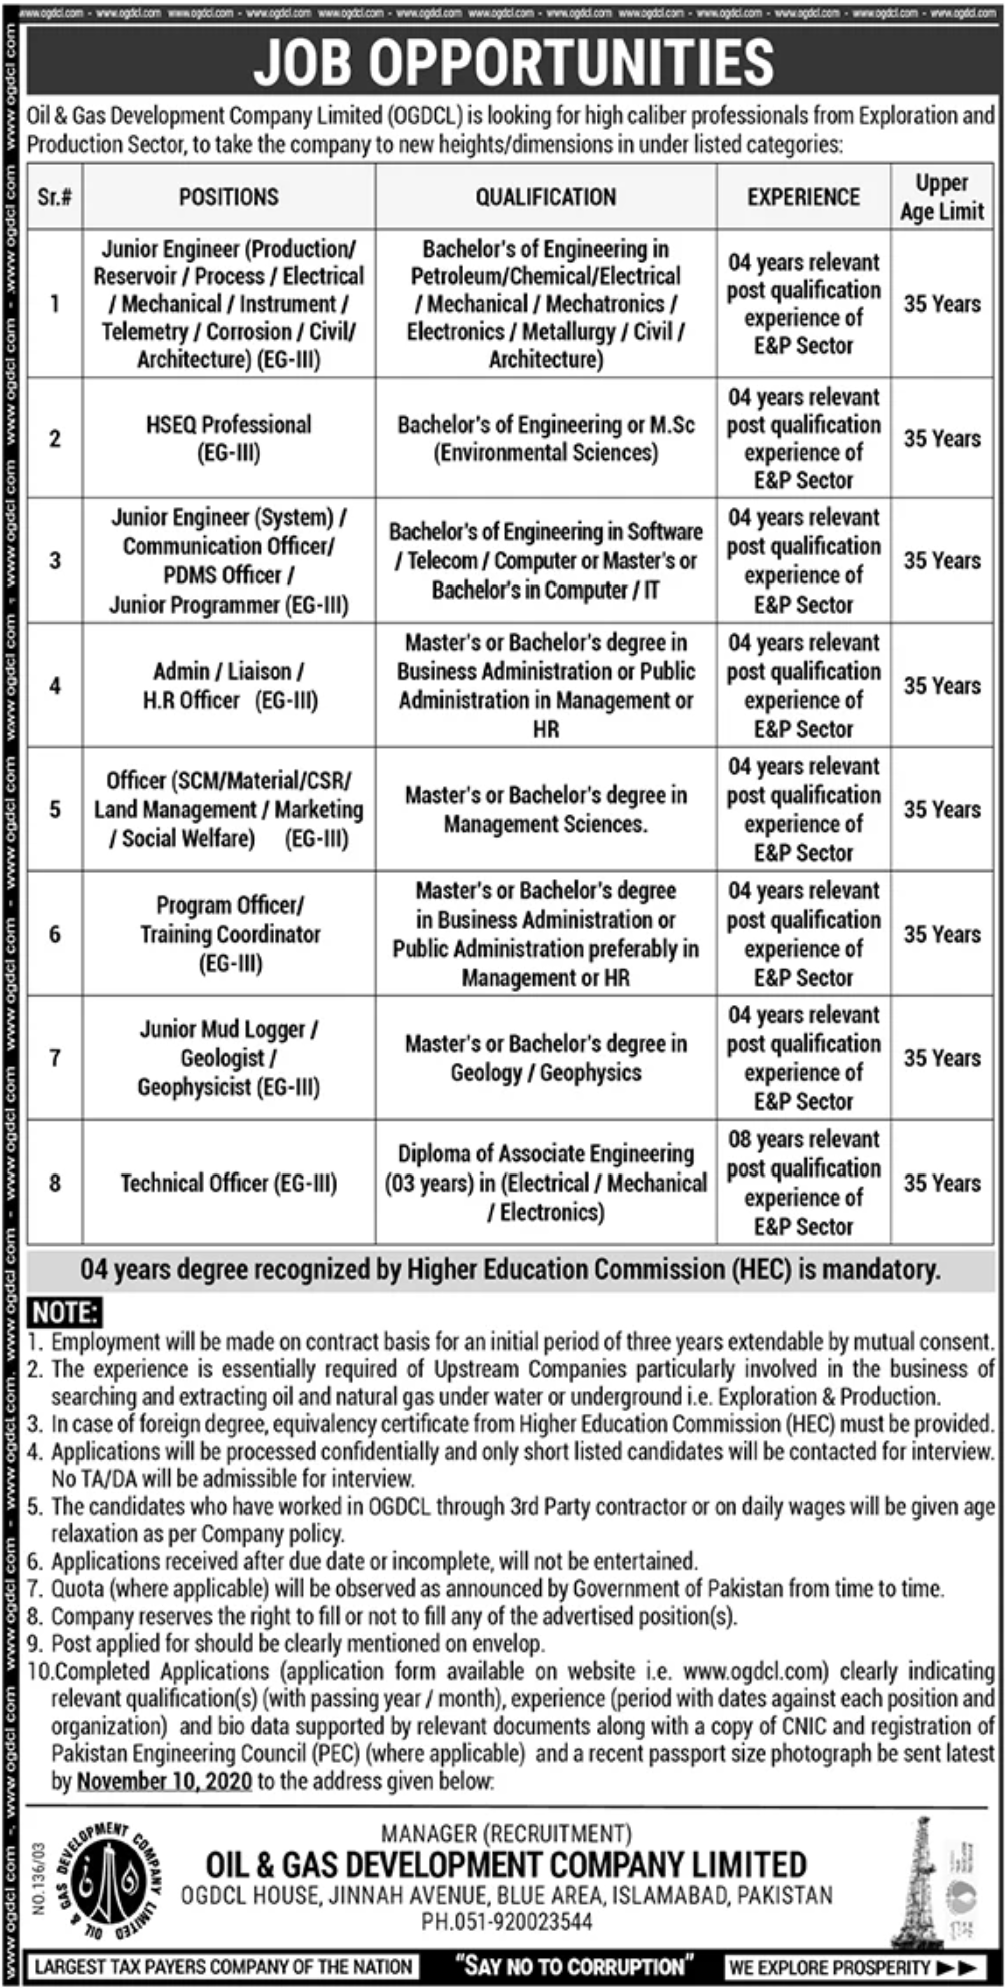 OGDCL Jobs October 2020 Application Form Junior Engineers, Officers & Others Oil and Gas Development Company Limited Latest